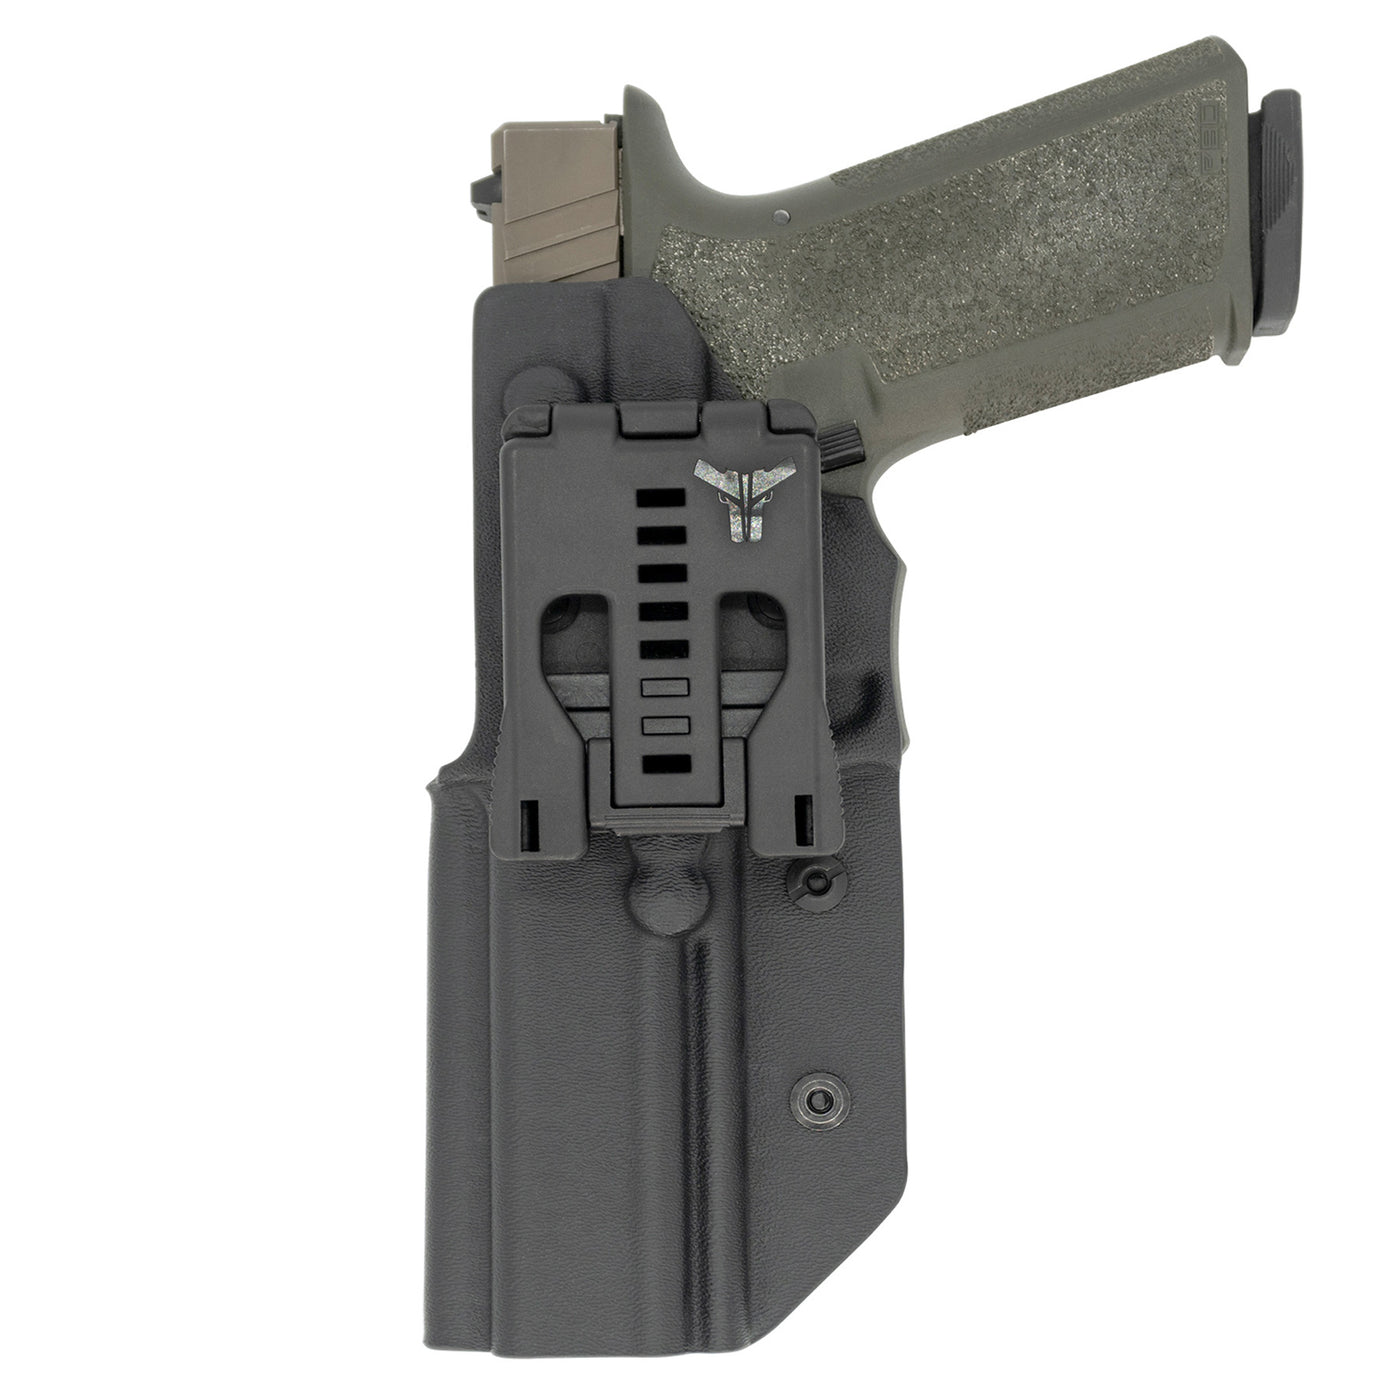 C&G Holsters Competition Holster for the PF 9/40v2 rear view